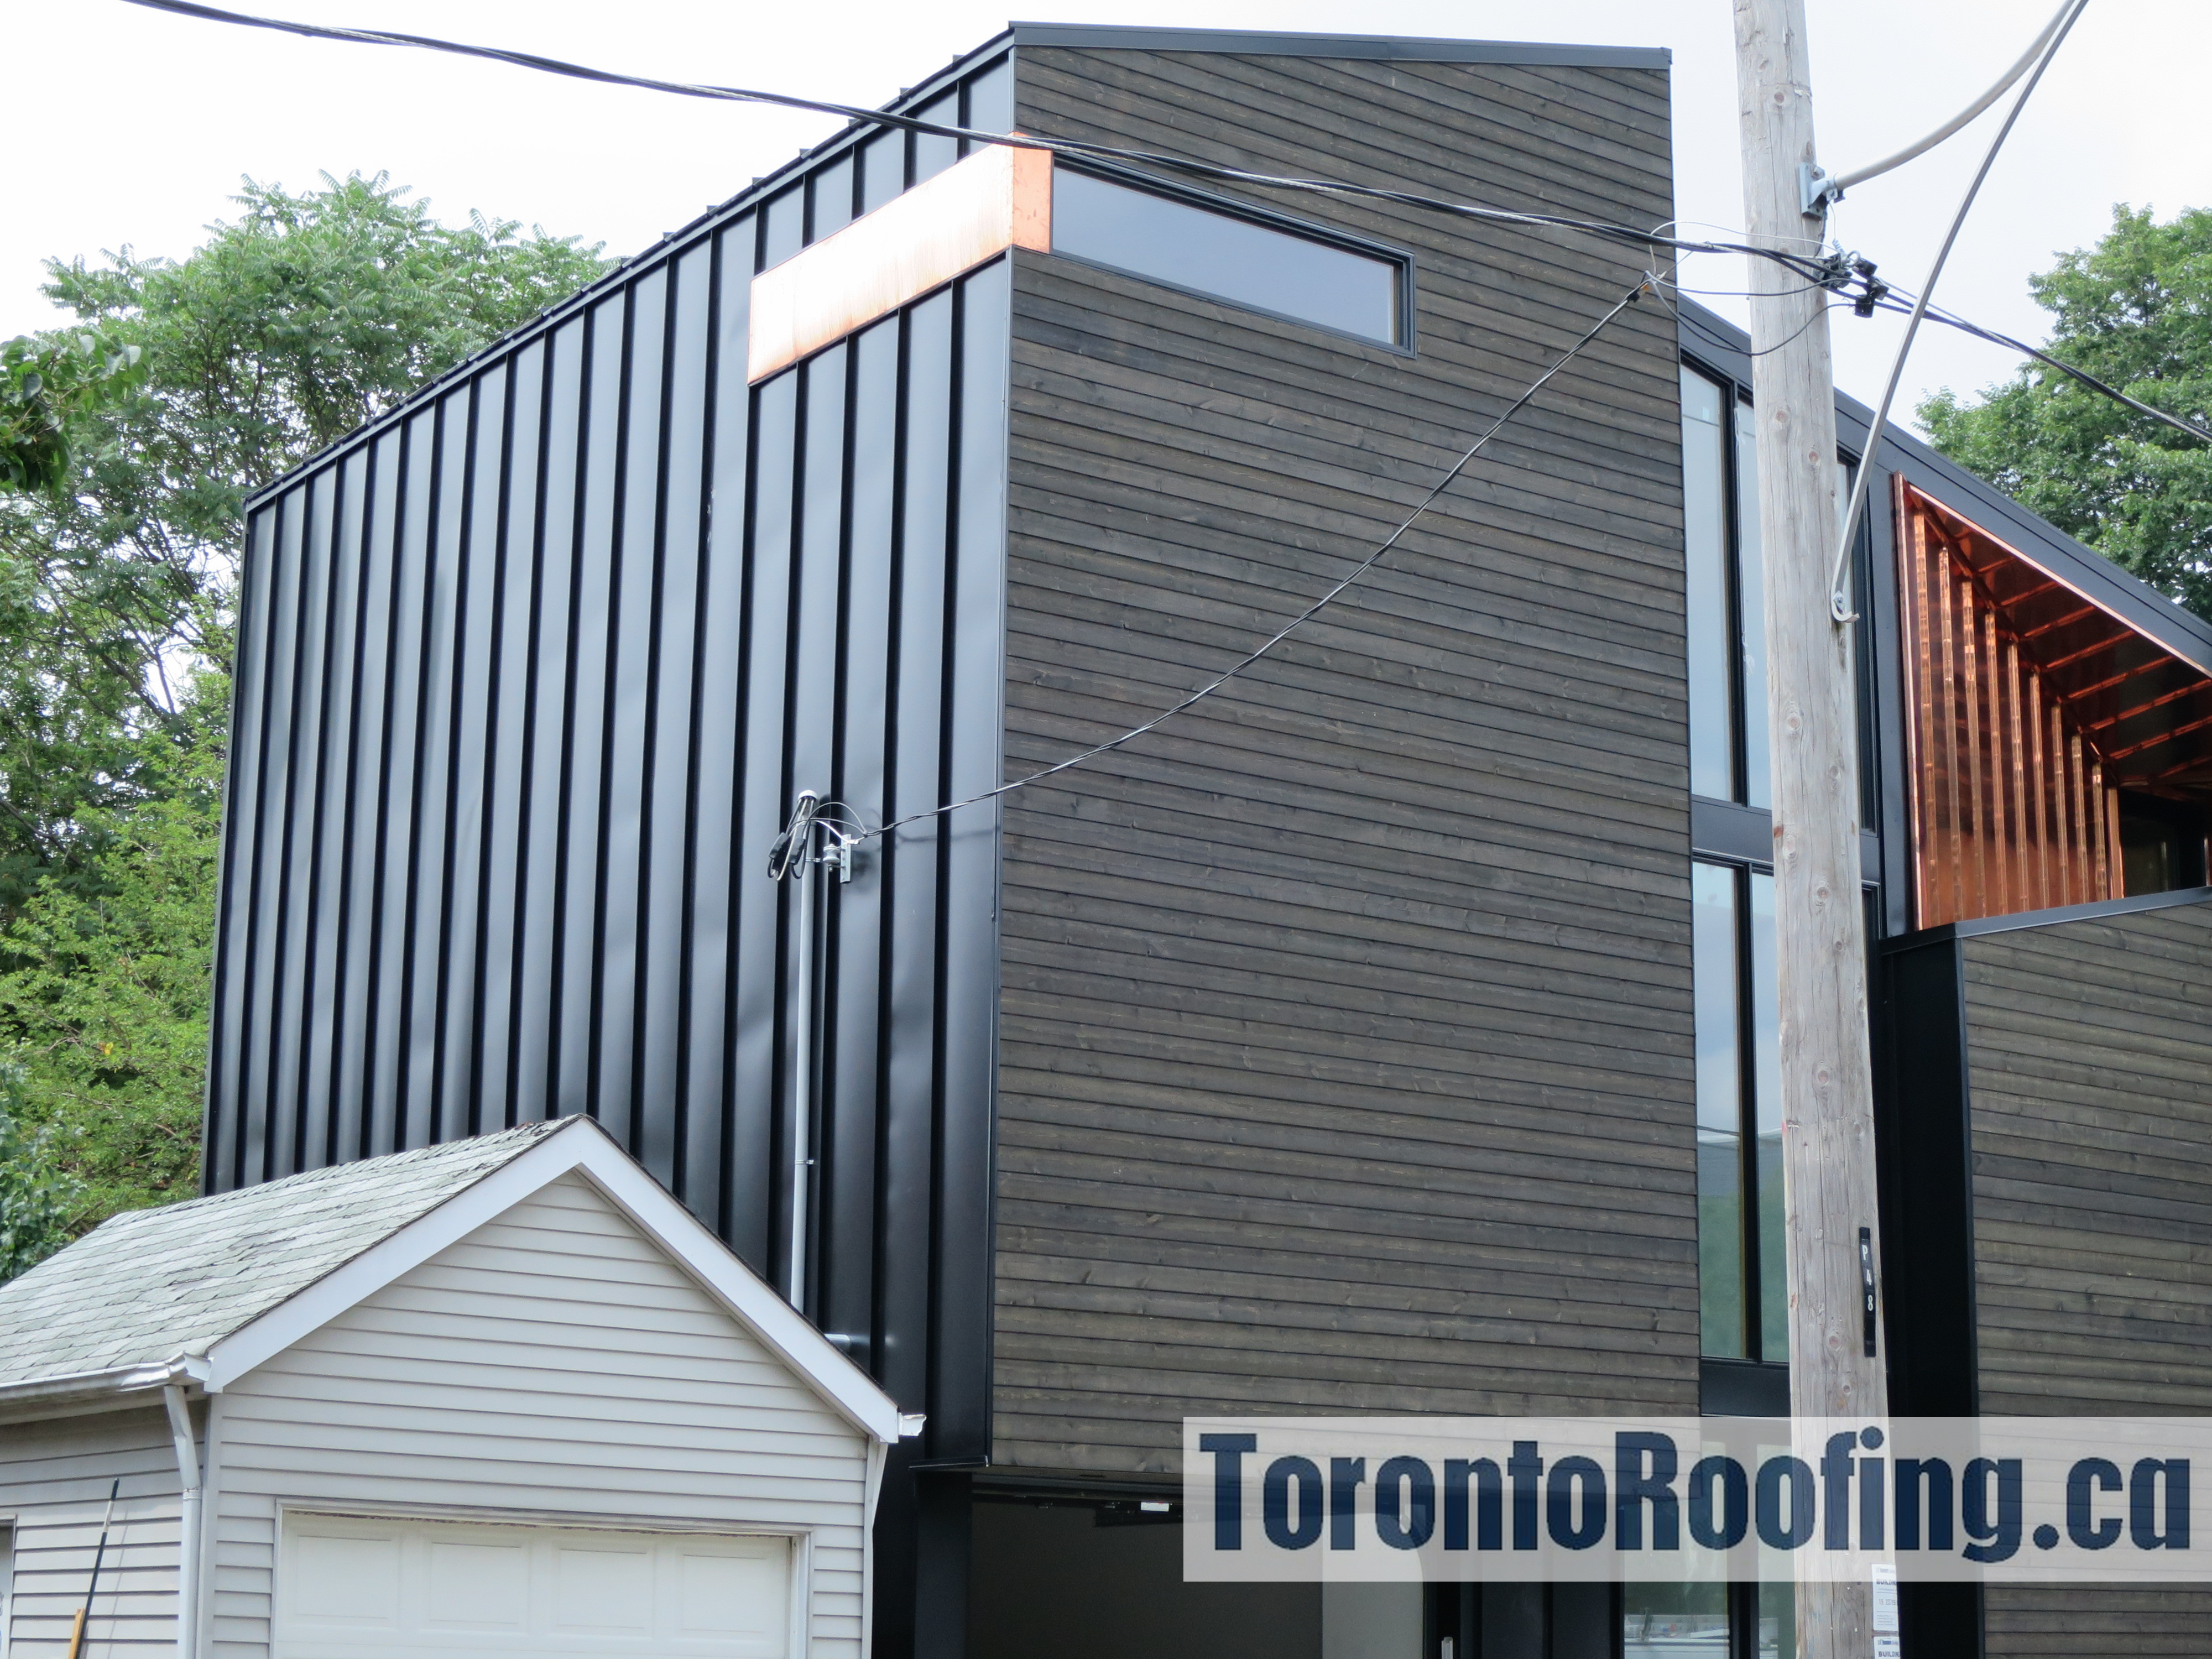 toronto-roofing-roof-siding-metal-copper-wood-modern-homes-aluminum-cladding-architeture-building-contractor-exterior-8